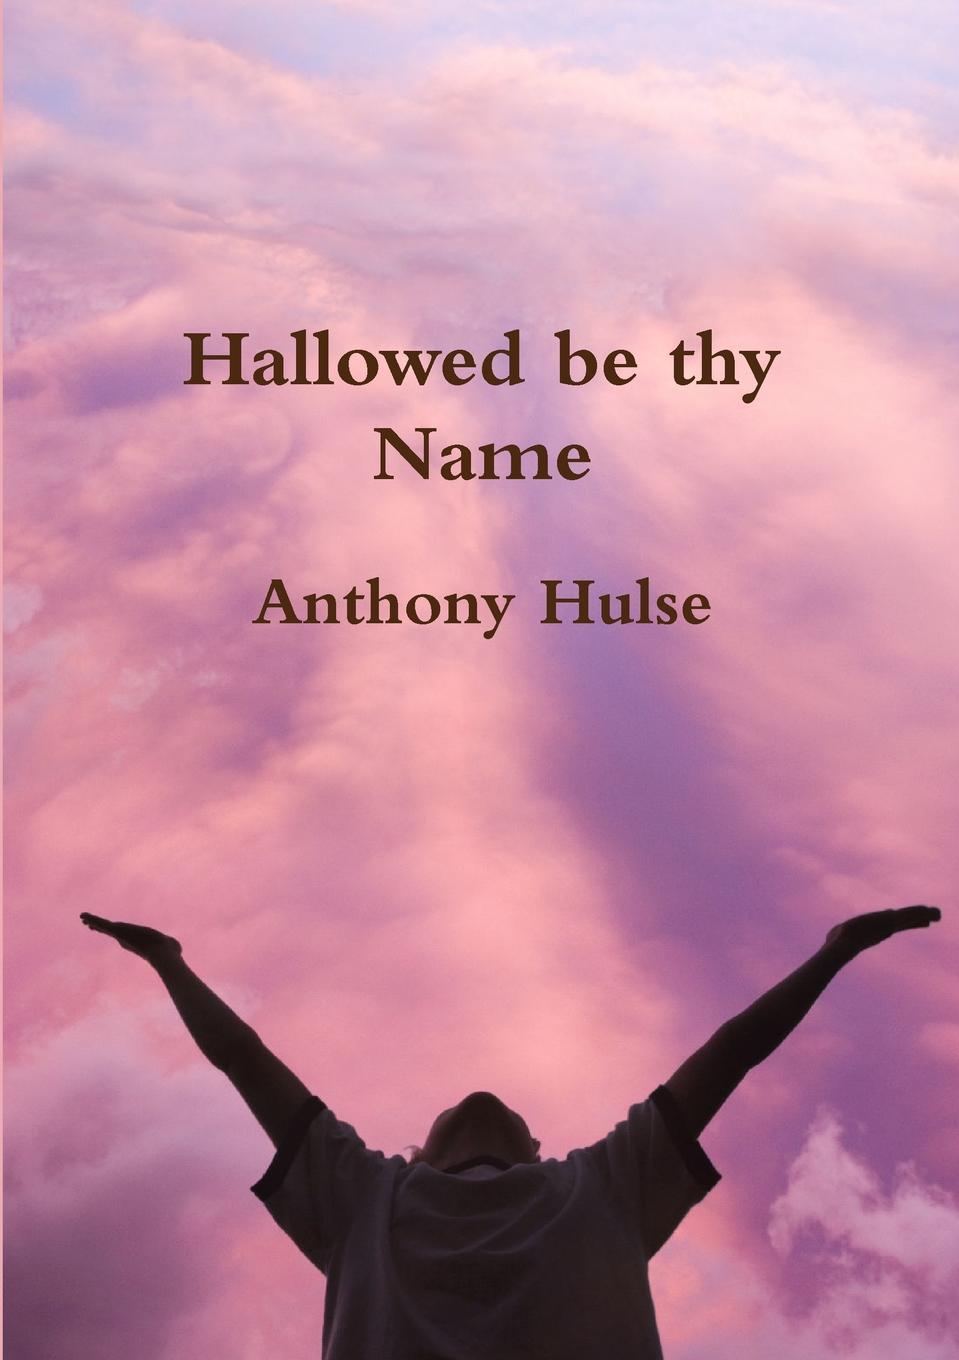 ANTHONY HULSE Hallowed be thy Name